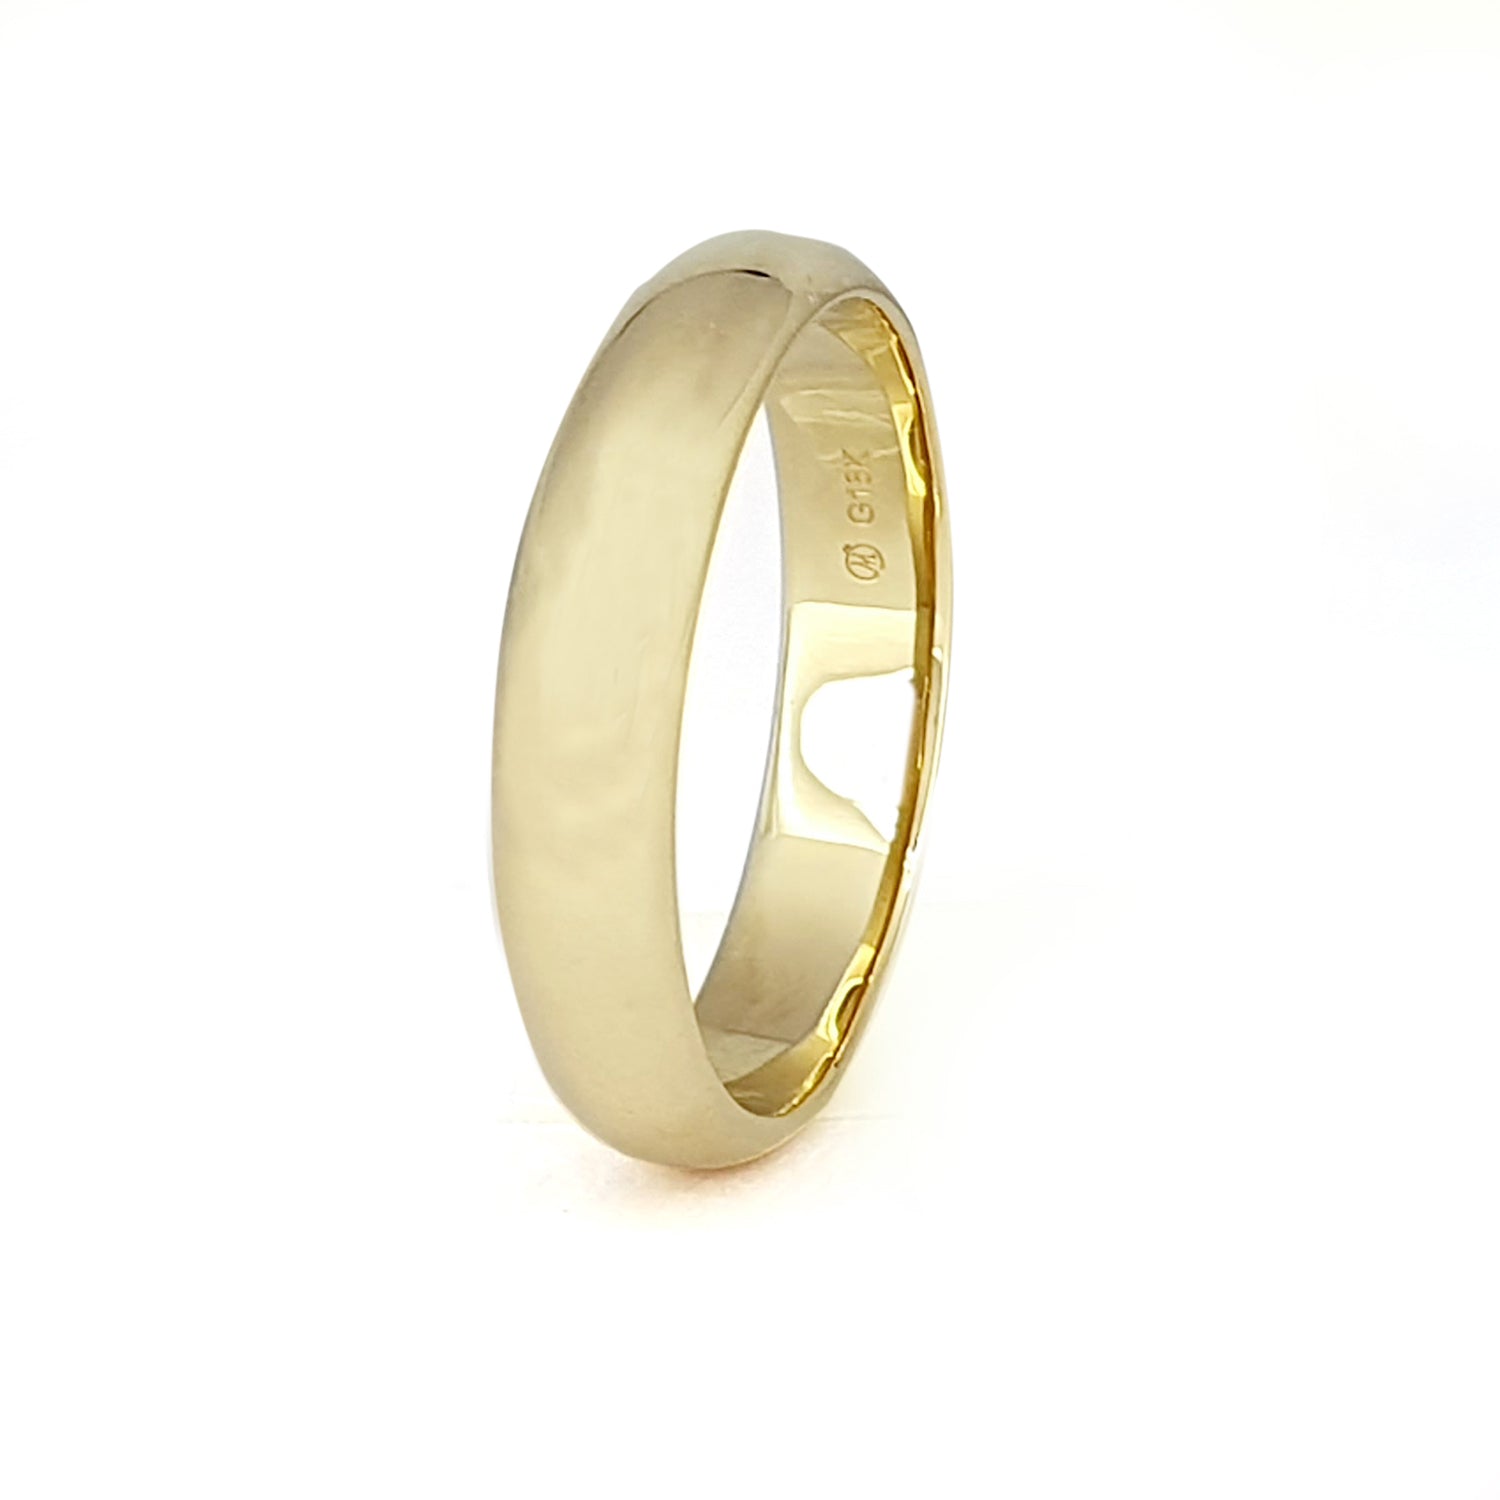 Gold Band Ring | Gold Plated Rings | Meicel Jewelry Store